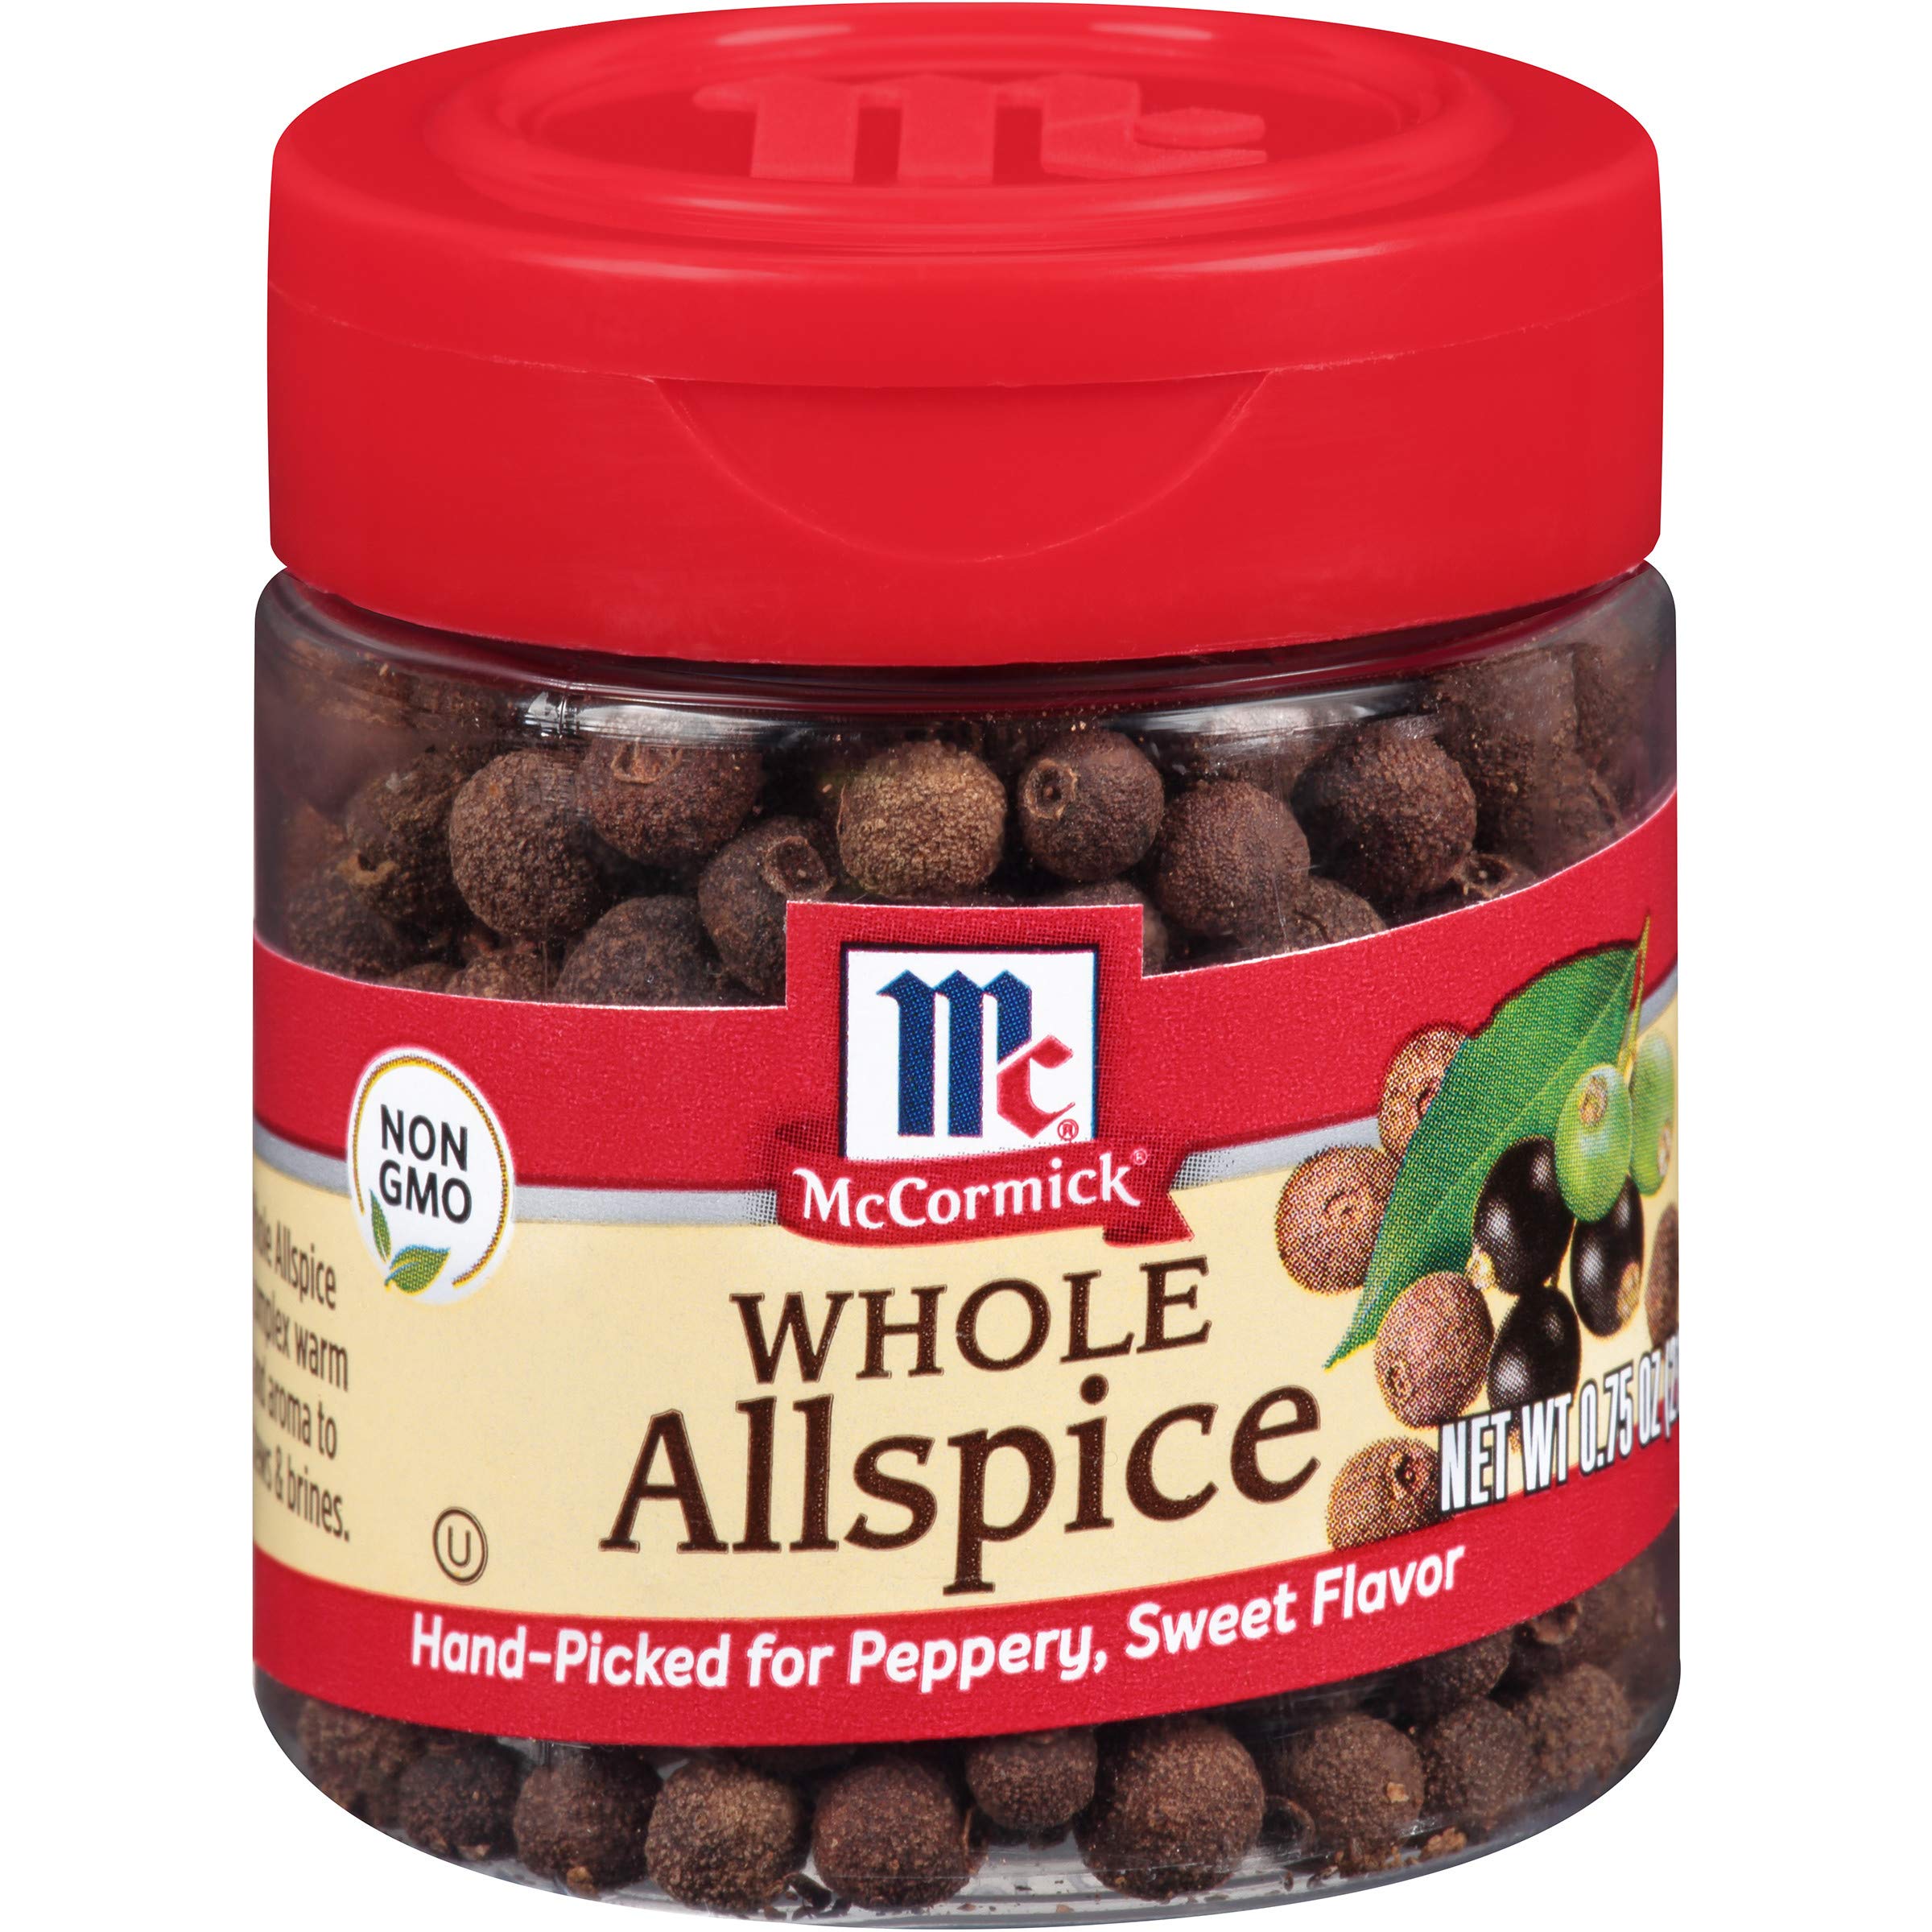 0.75-Ounce McCormick Whole Allspice $4.15 + Free Shipping w/ Prime or on orders $35+